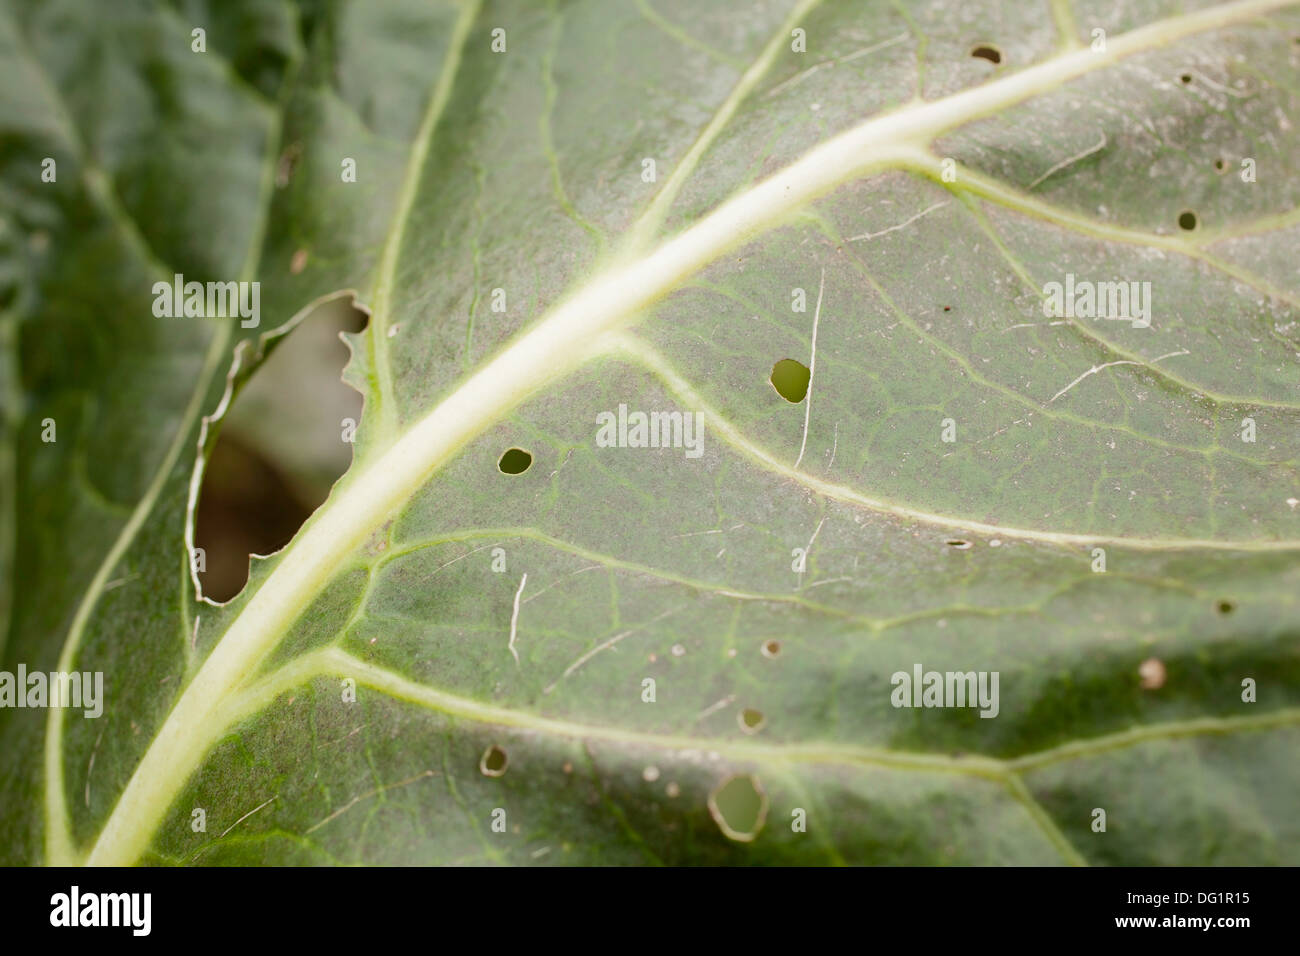 A cauliflower leaf shows signs of insect damage in late summer garden. Stock Photo